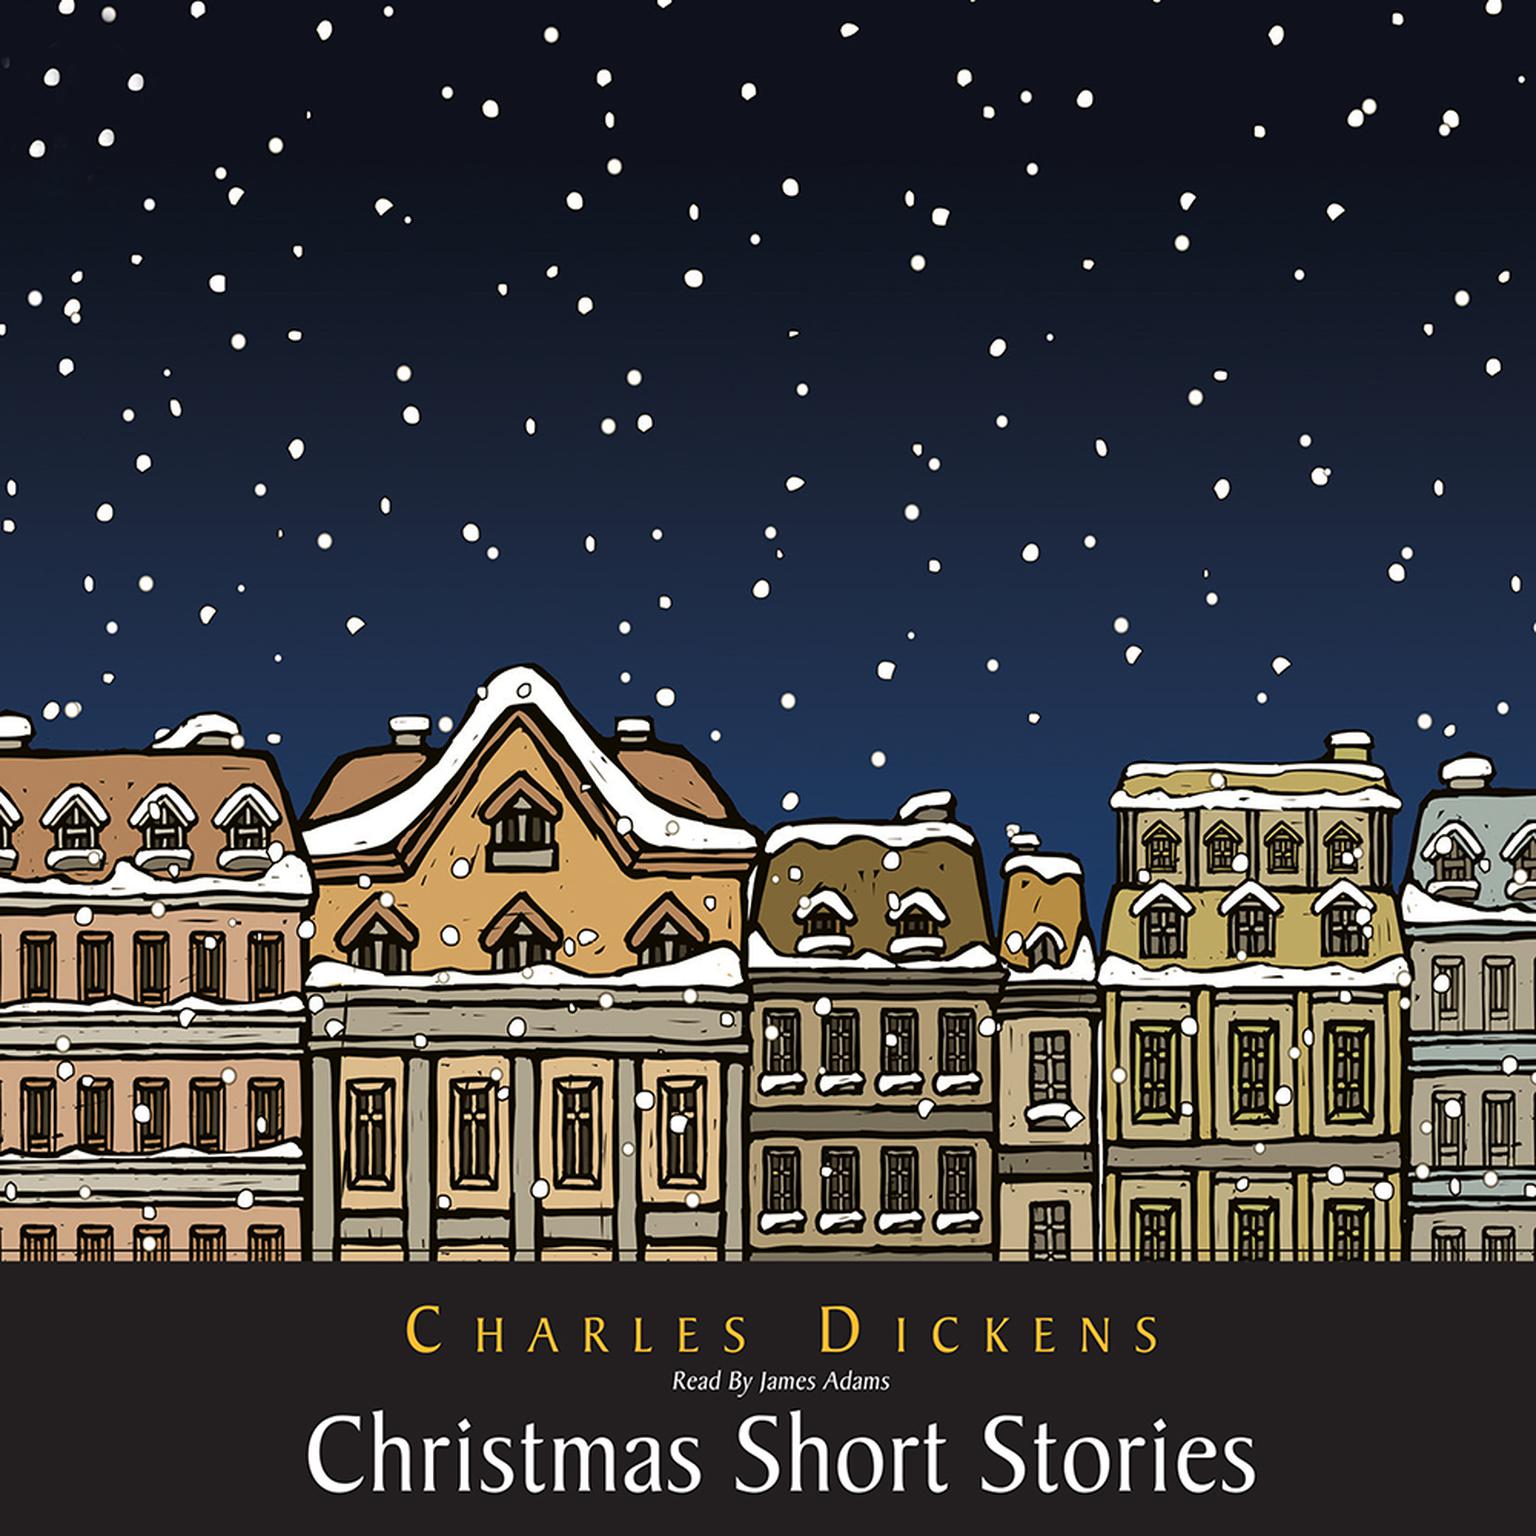 Christmas Short Stories Audiobook, by Charles Dickens